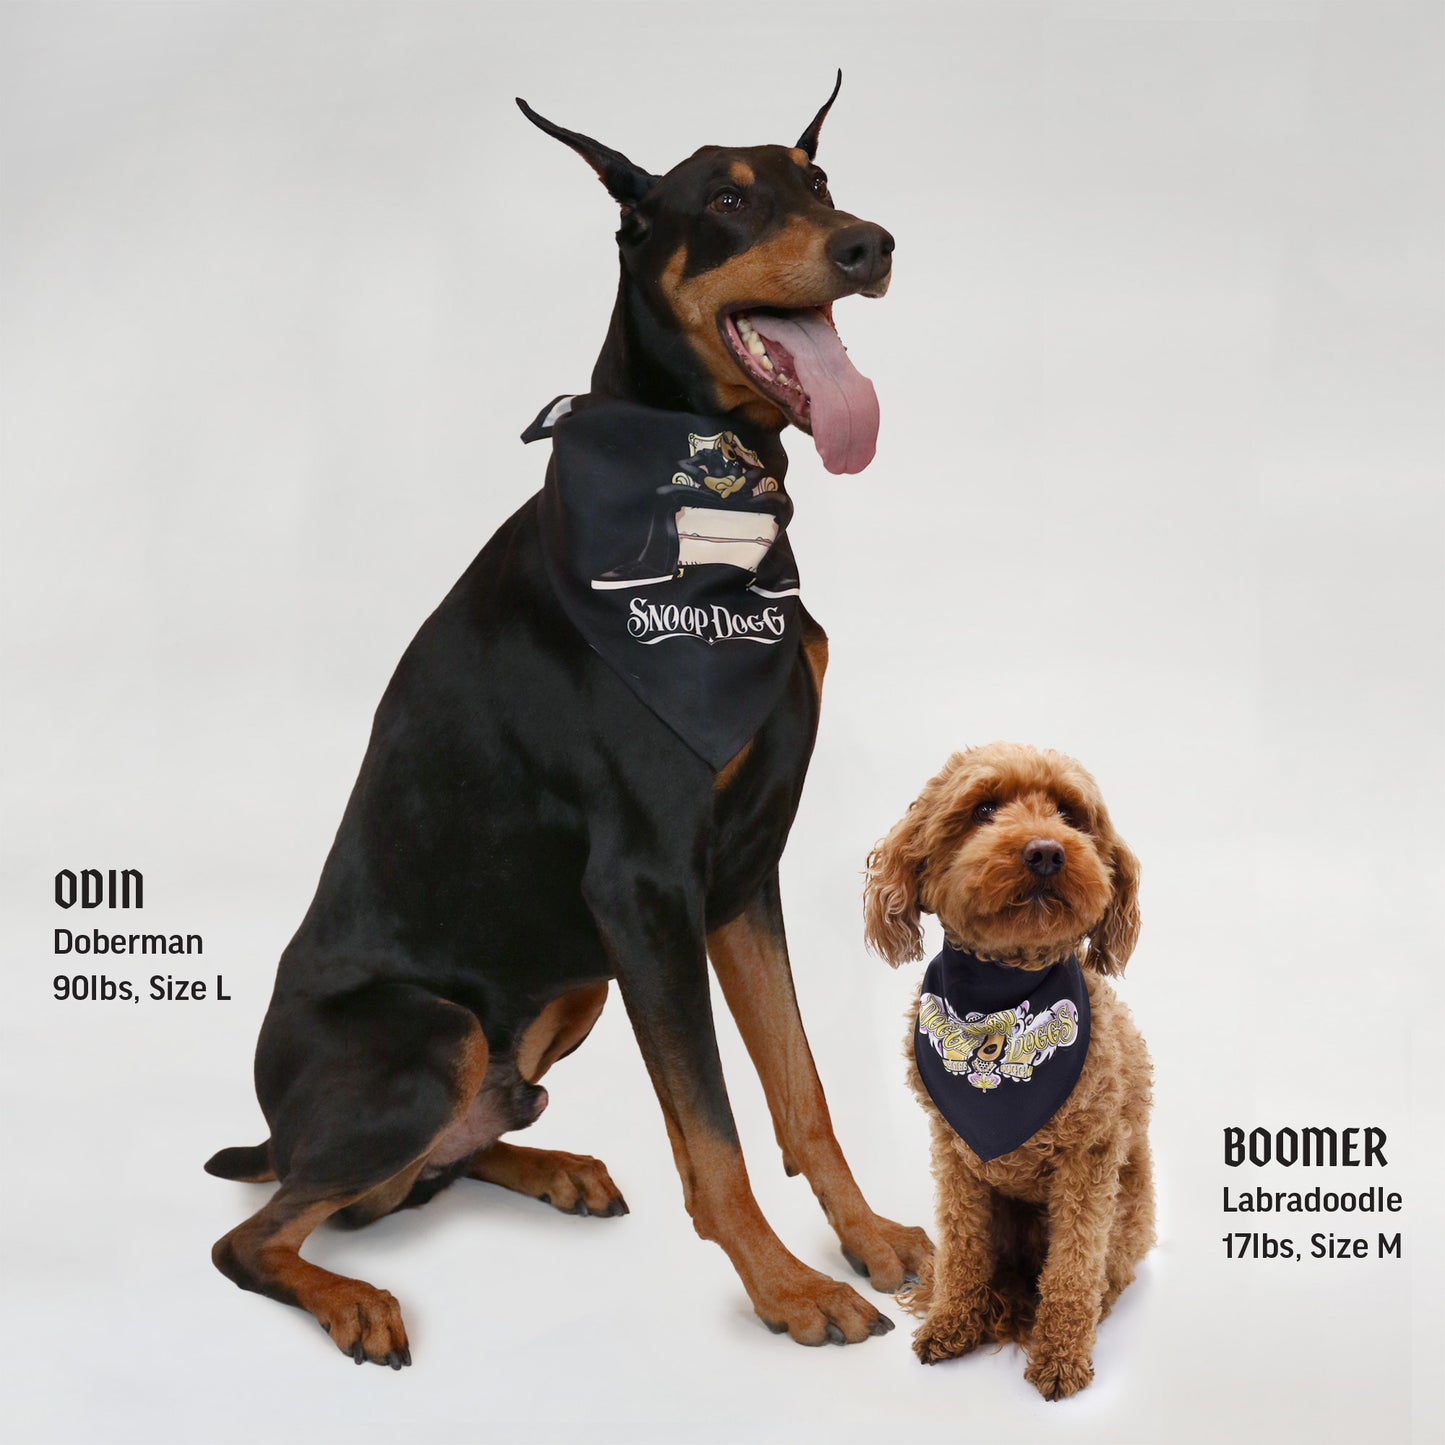 Basic Pet Bandanda Set of 2 shown in Size Large on Odin the Doberman and in Size Medium on Boomer the Labradoodle.